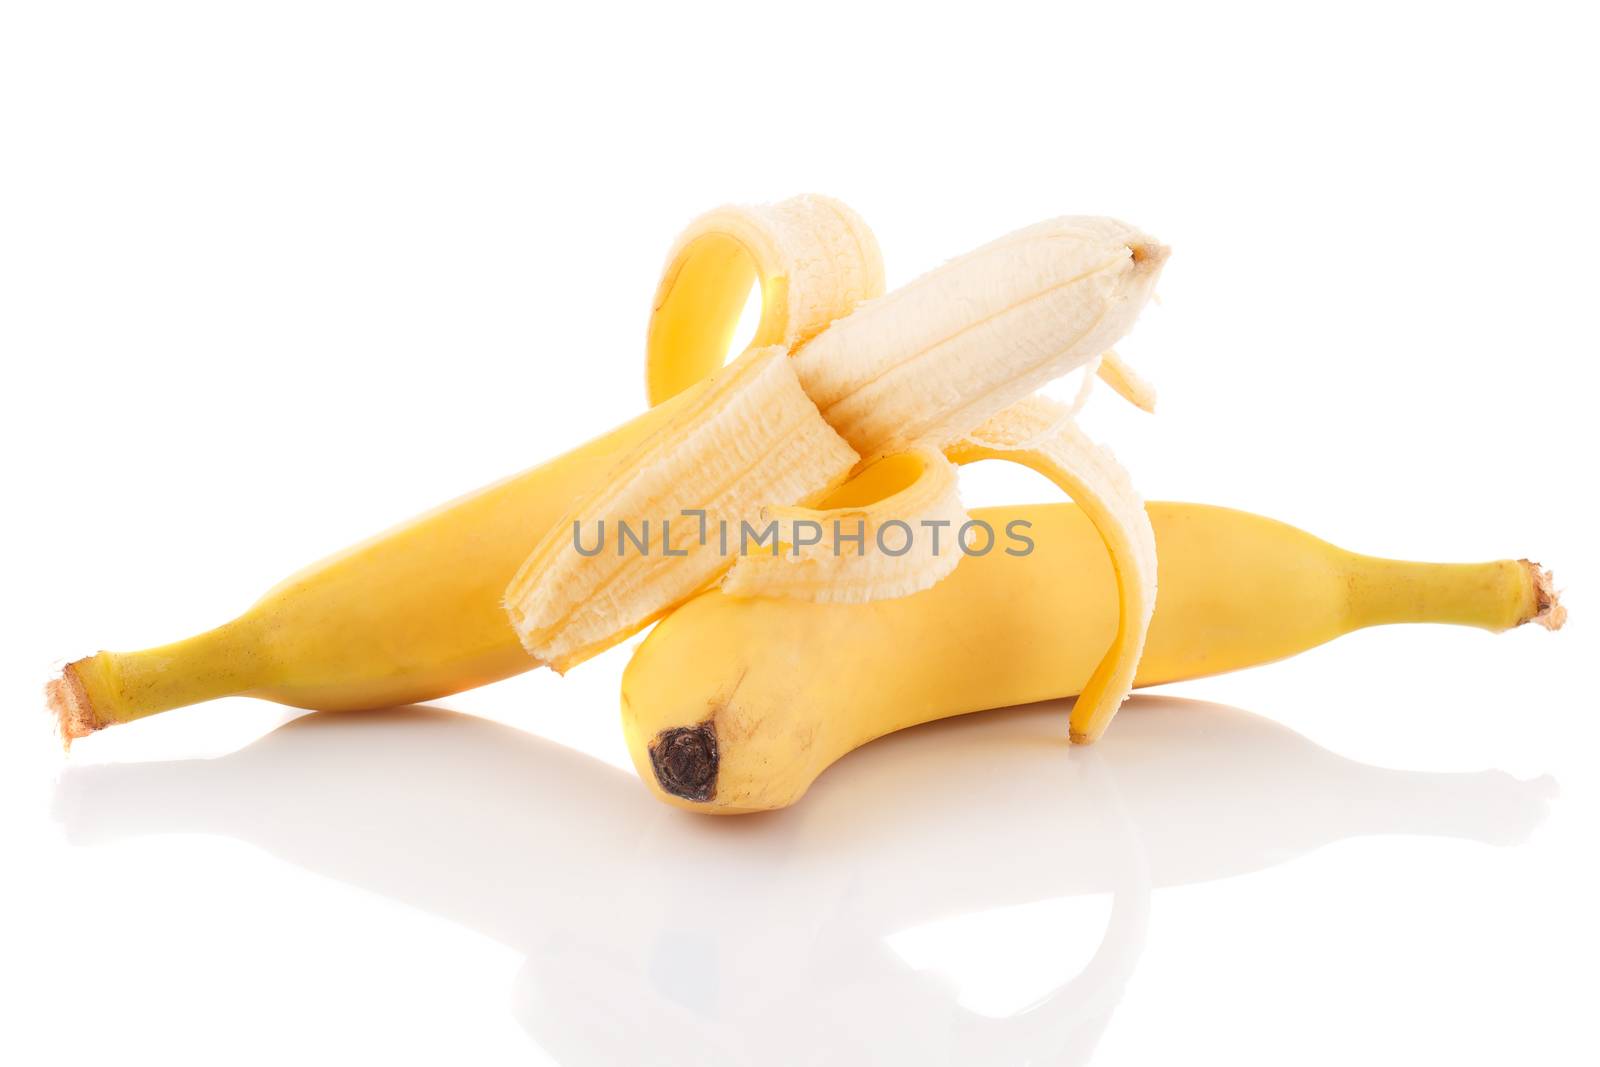 Half peeled ripe banana and another not peeled on a white background.